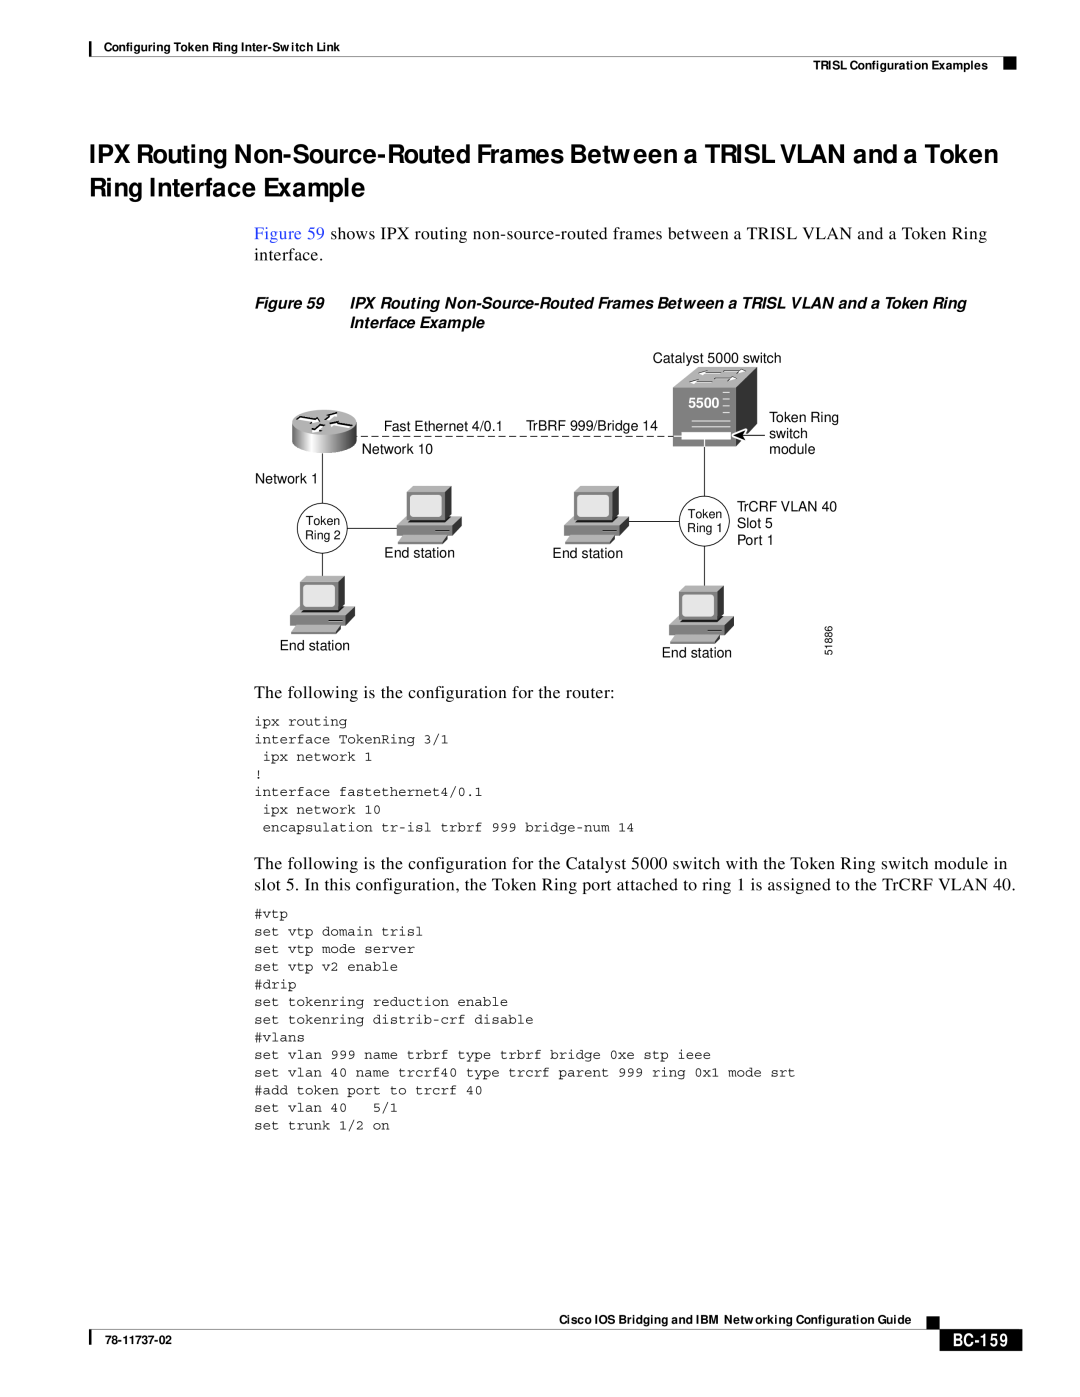 Cisco Systems BC-145 manual BC-159, Configuring Token Ring Inter-Switch Link TRISL Configuration Examples, 5500, Network 